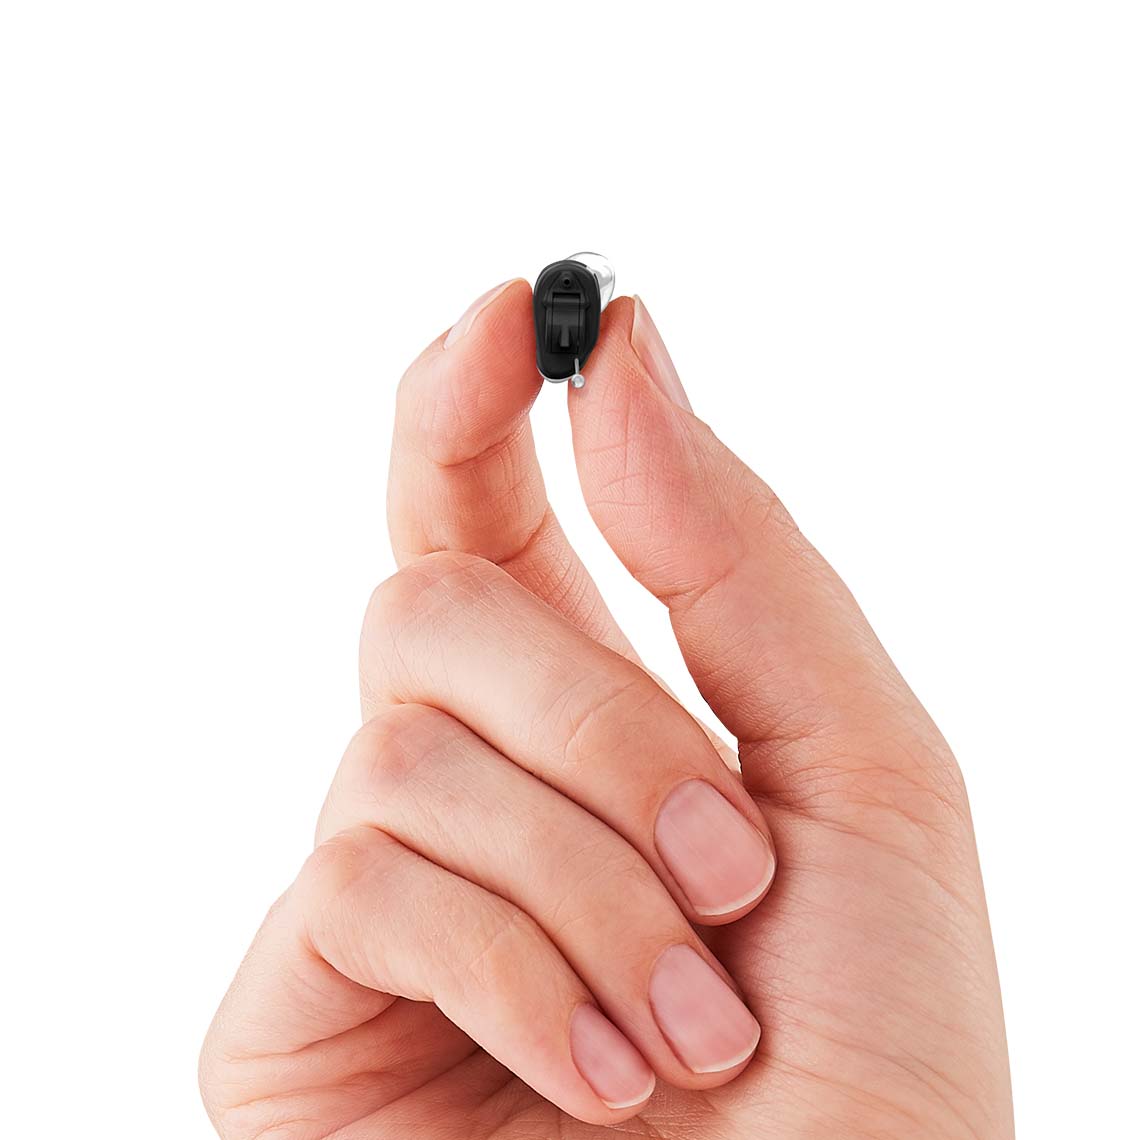 An CIC non-wireless hearing aid being held in a hand